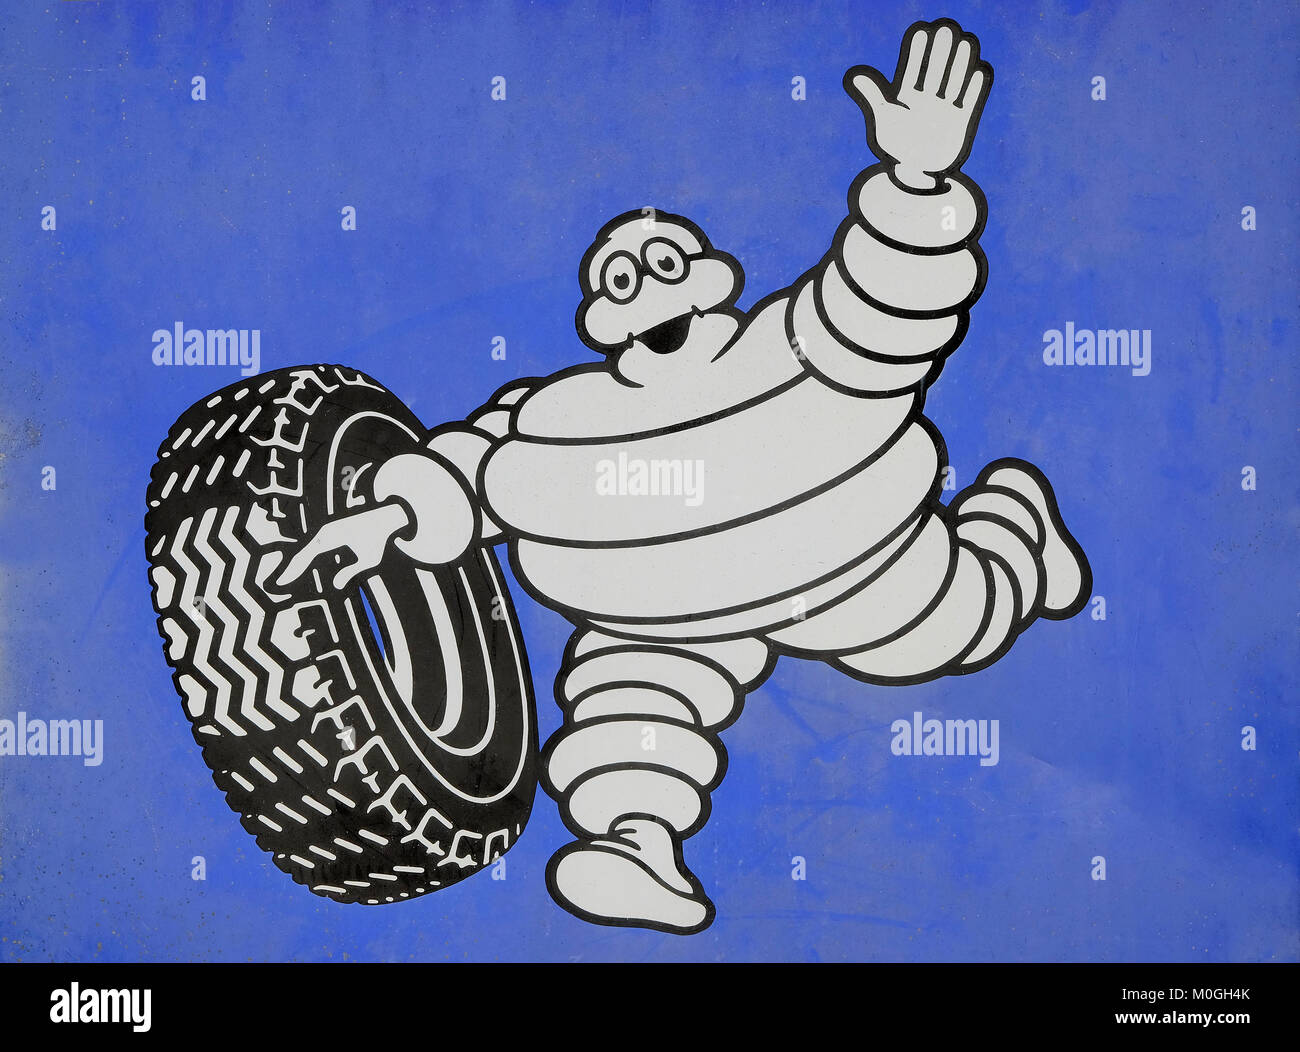 Michelin Tyres Logo High Resolution Stock Photography And Images Alamy